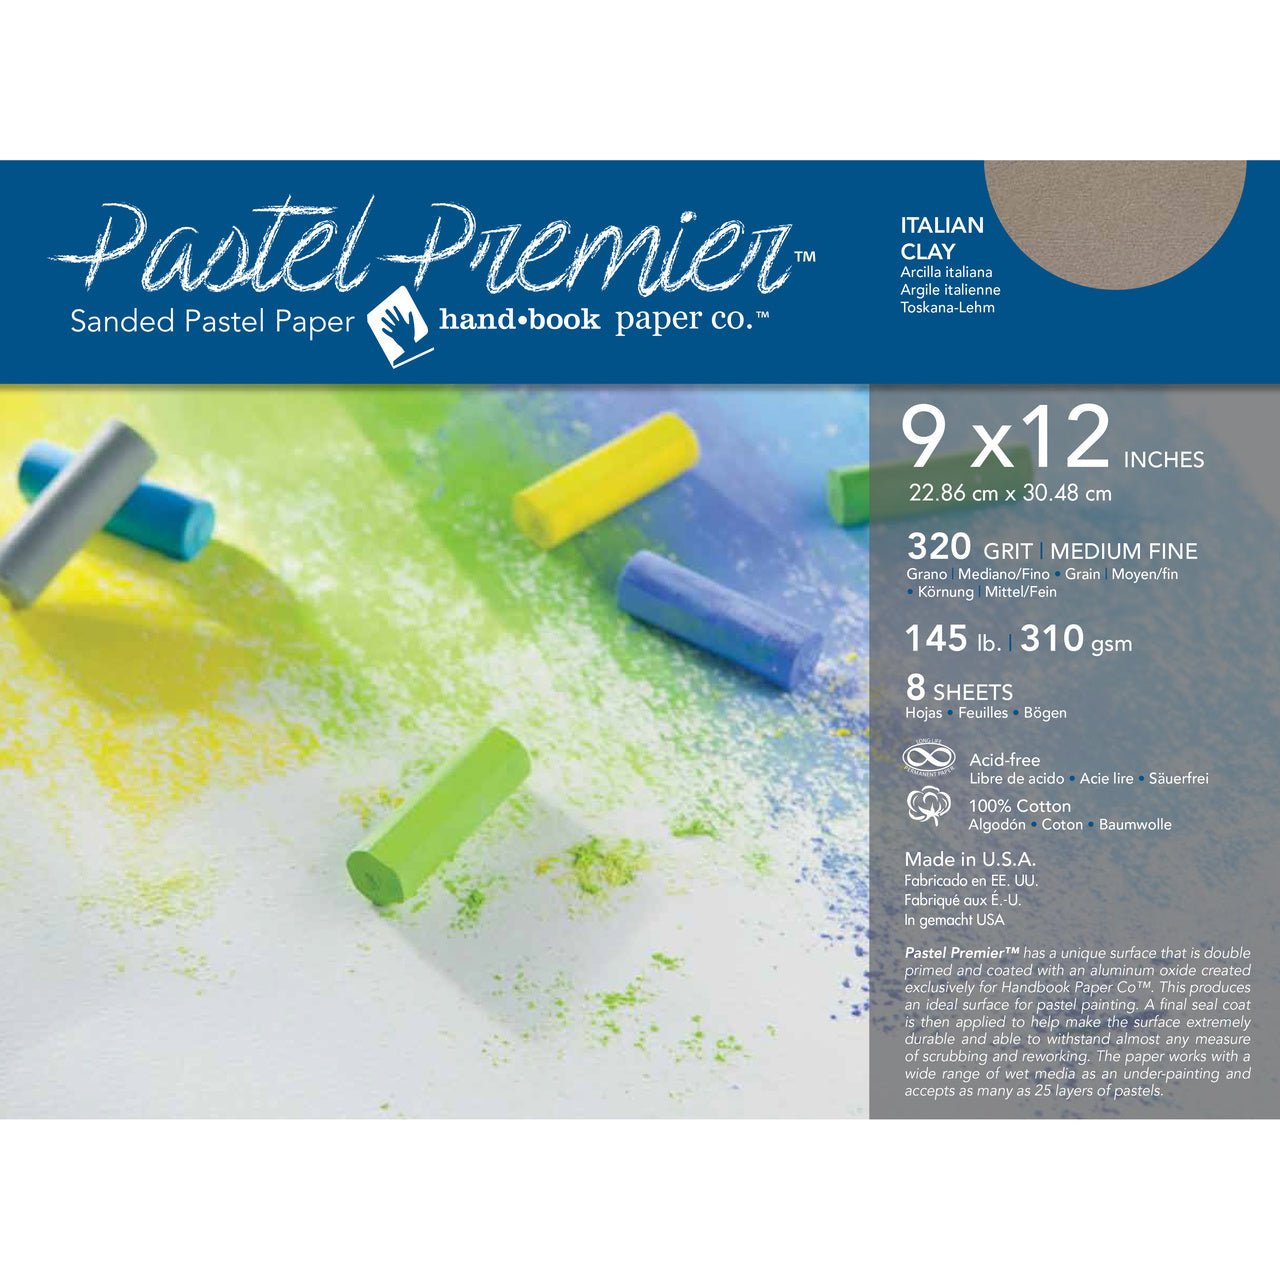 Pastel Premier Sanded Paper - 320 grit Italian Clay 9X12 Sheets - Pack of 8 - merriartist.com